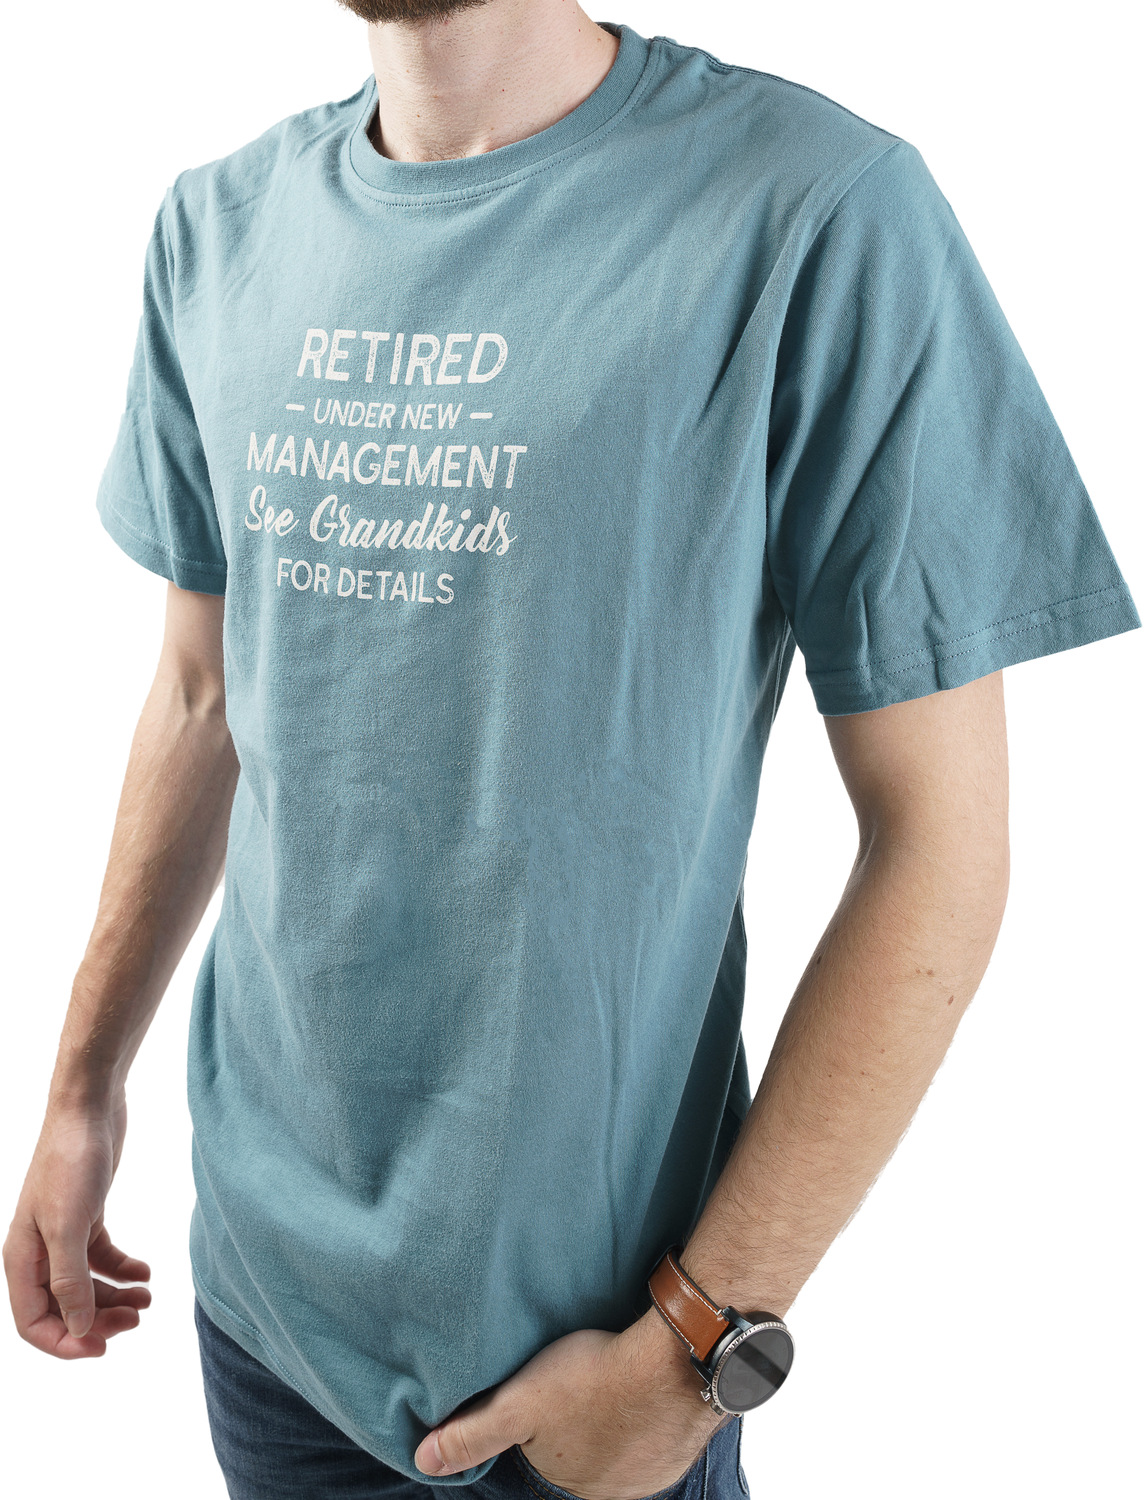 See Grandkids by Retired Life - See Grandkids - Small Steel Blue Unisex T-Shirt